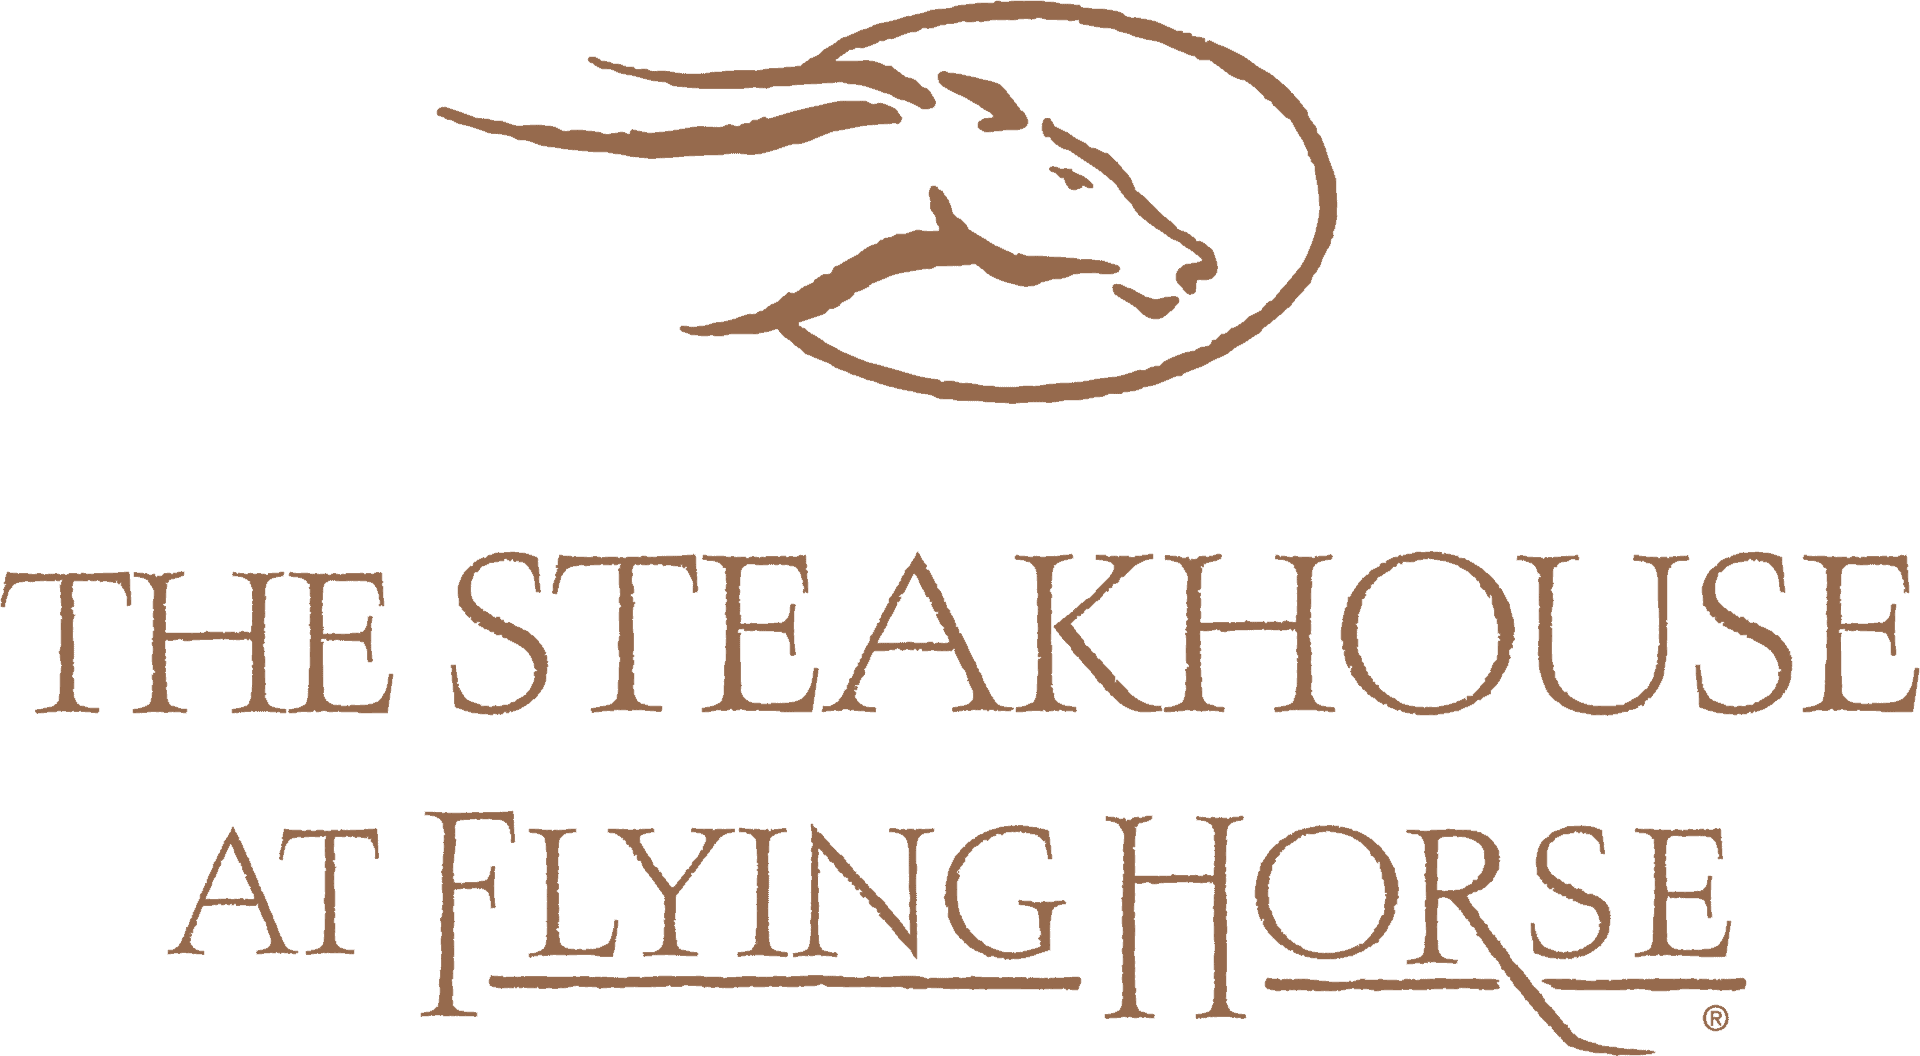 The Steakhouse at Flying Horse logo